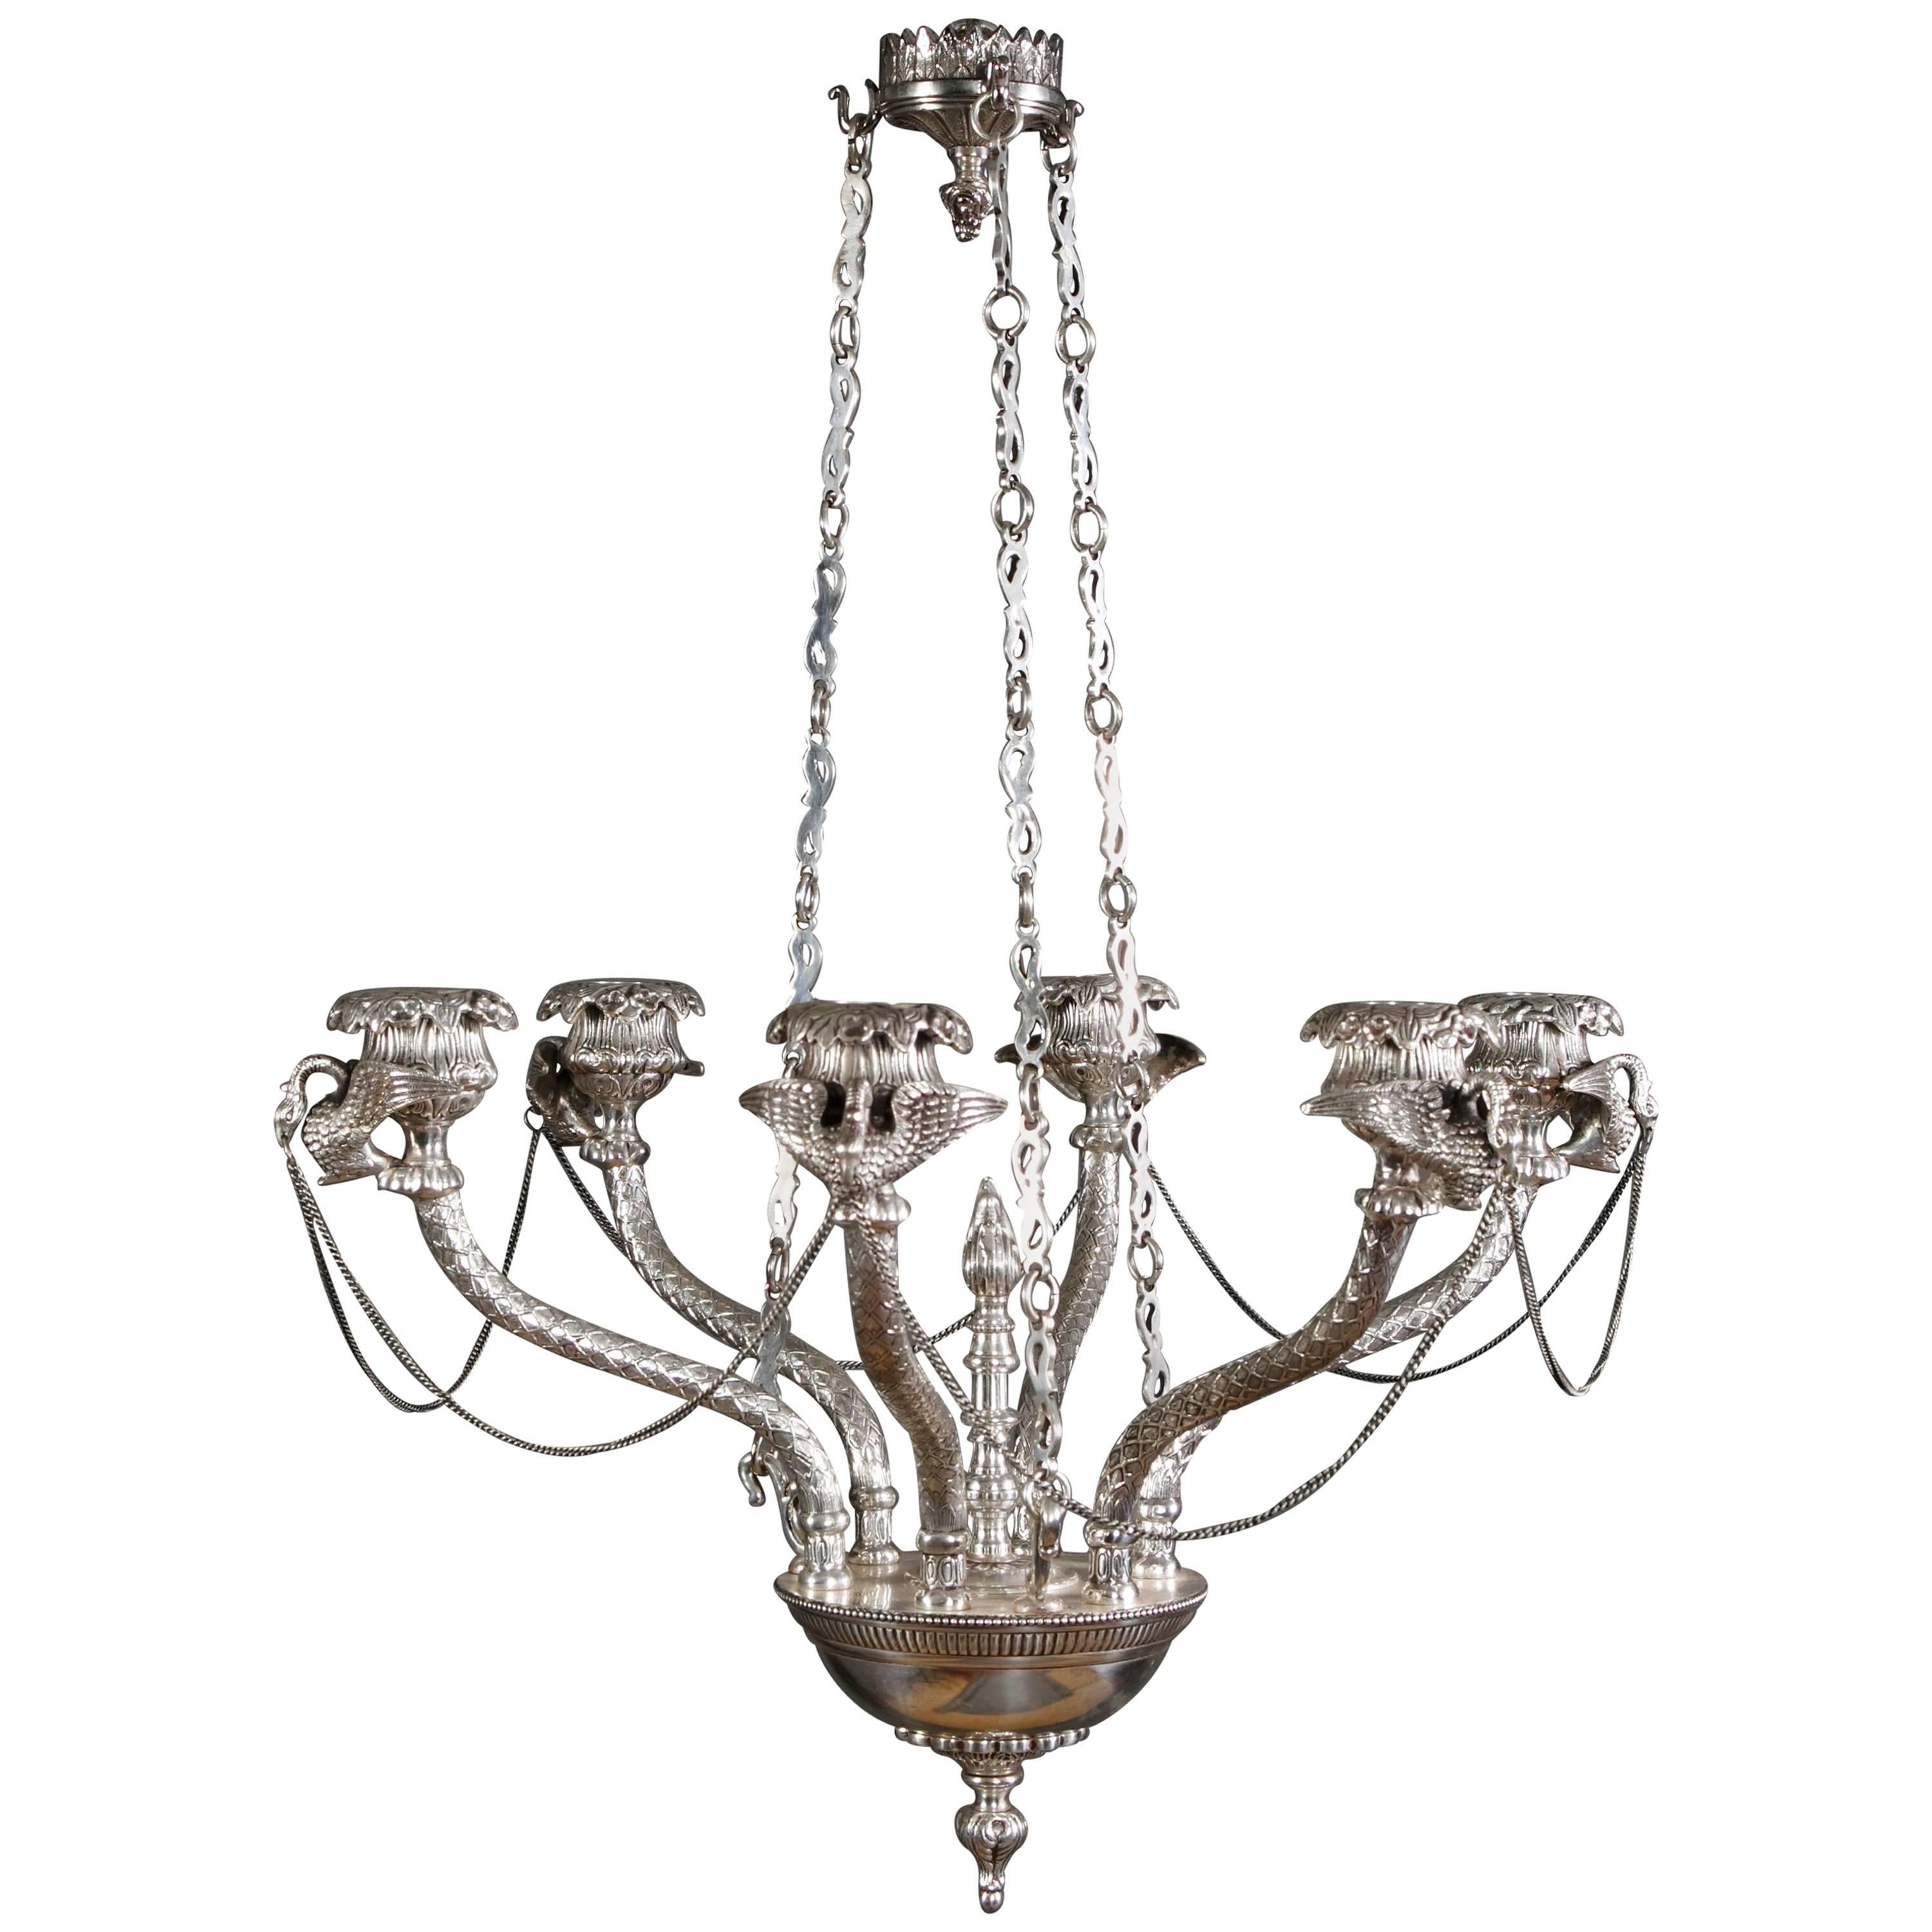 20th Century, Empire Style Silvered Ceiling Candelabra For Sale